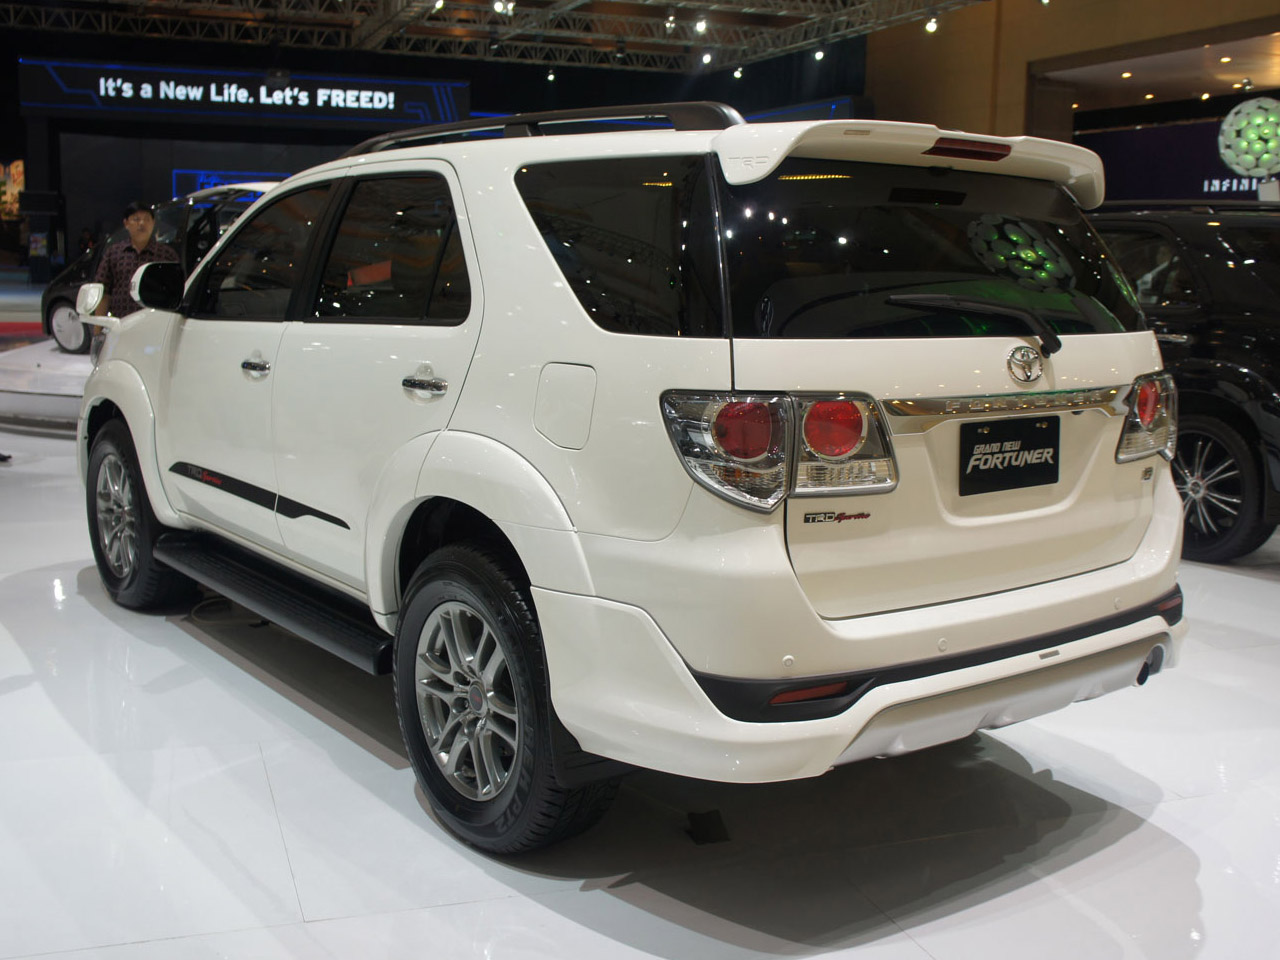 Best Toyota Fortuner Wallpapers part6 Best Cars HD Wallpapers 1280x960